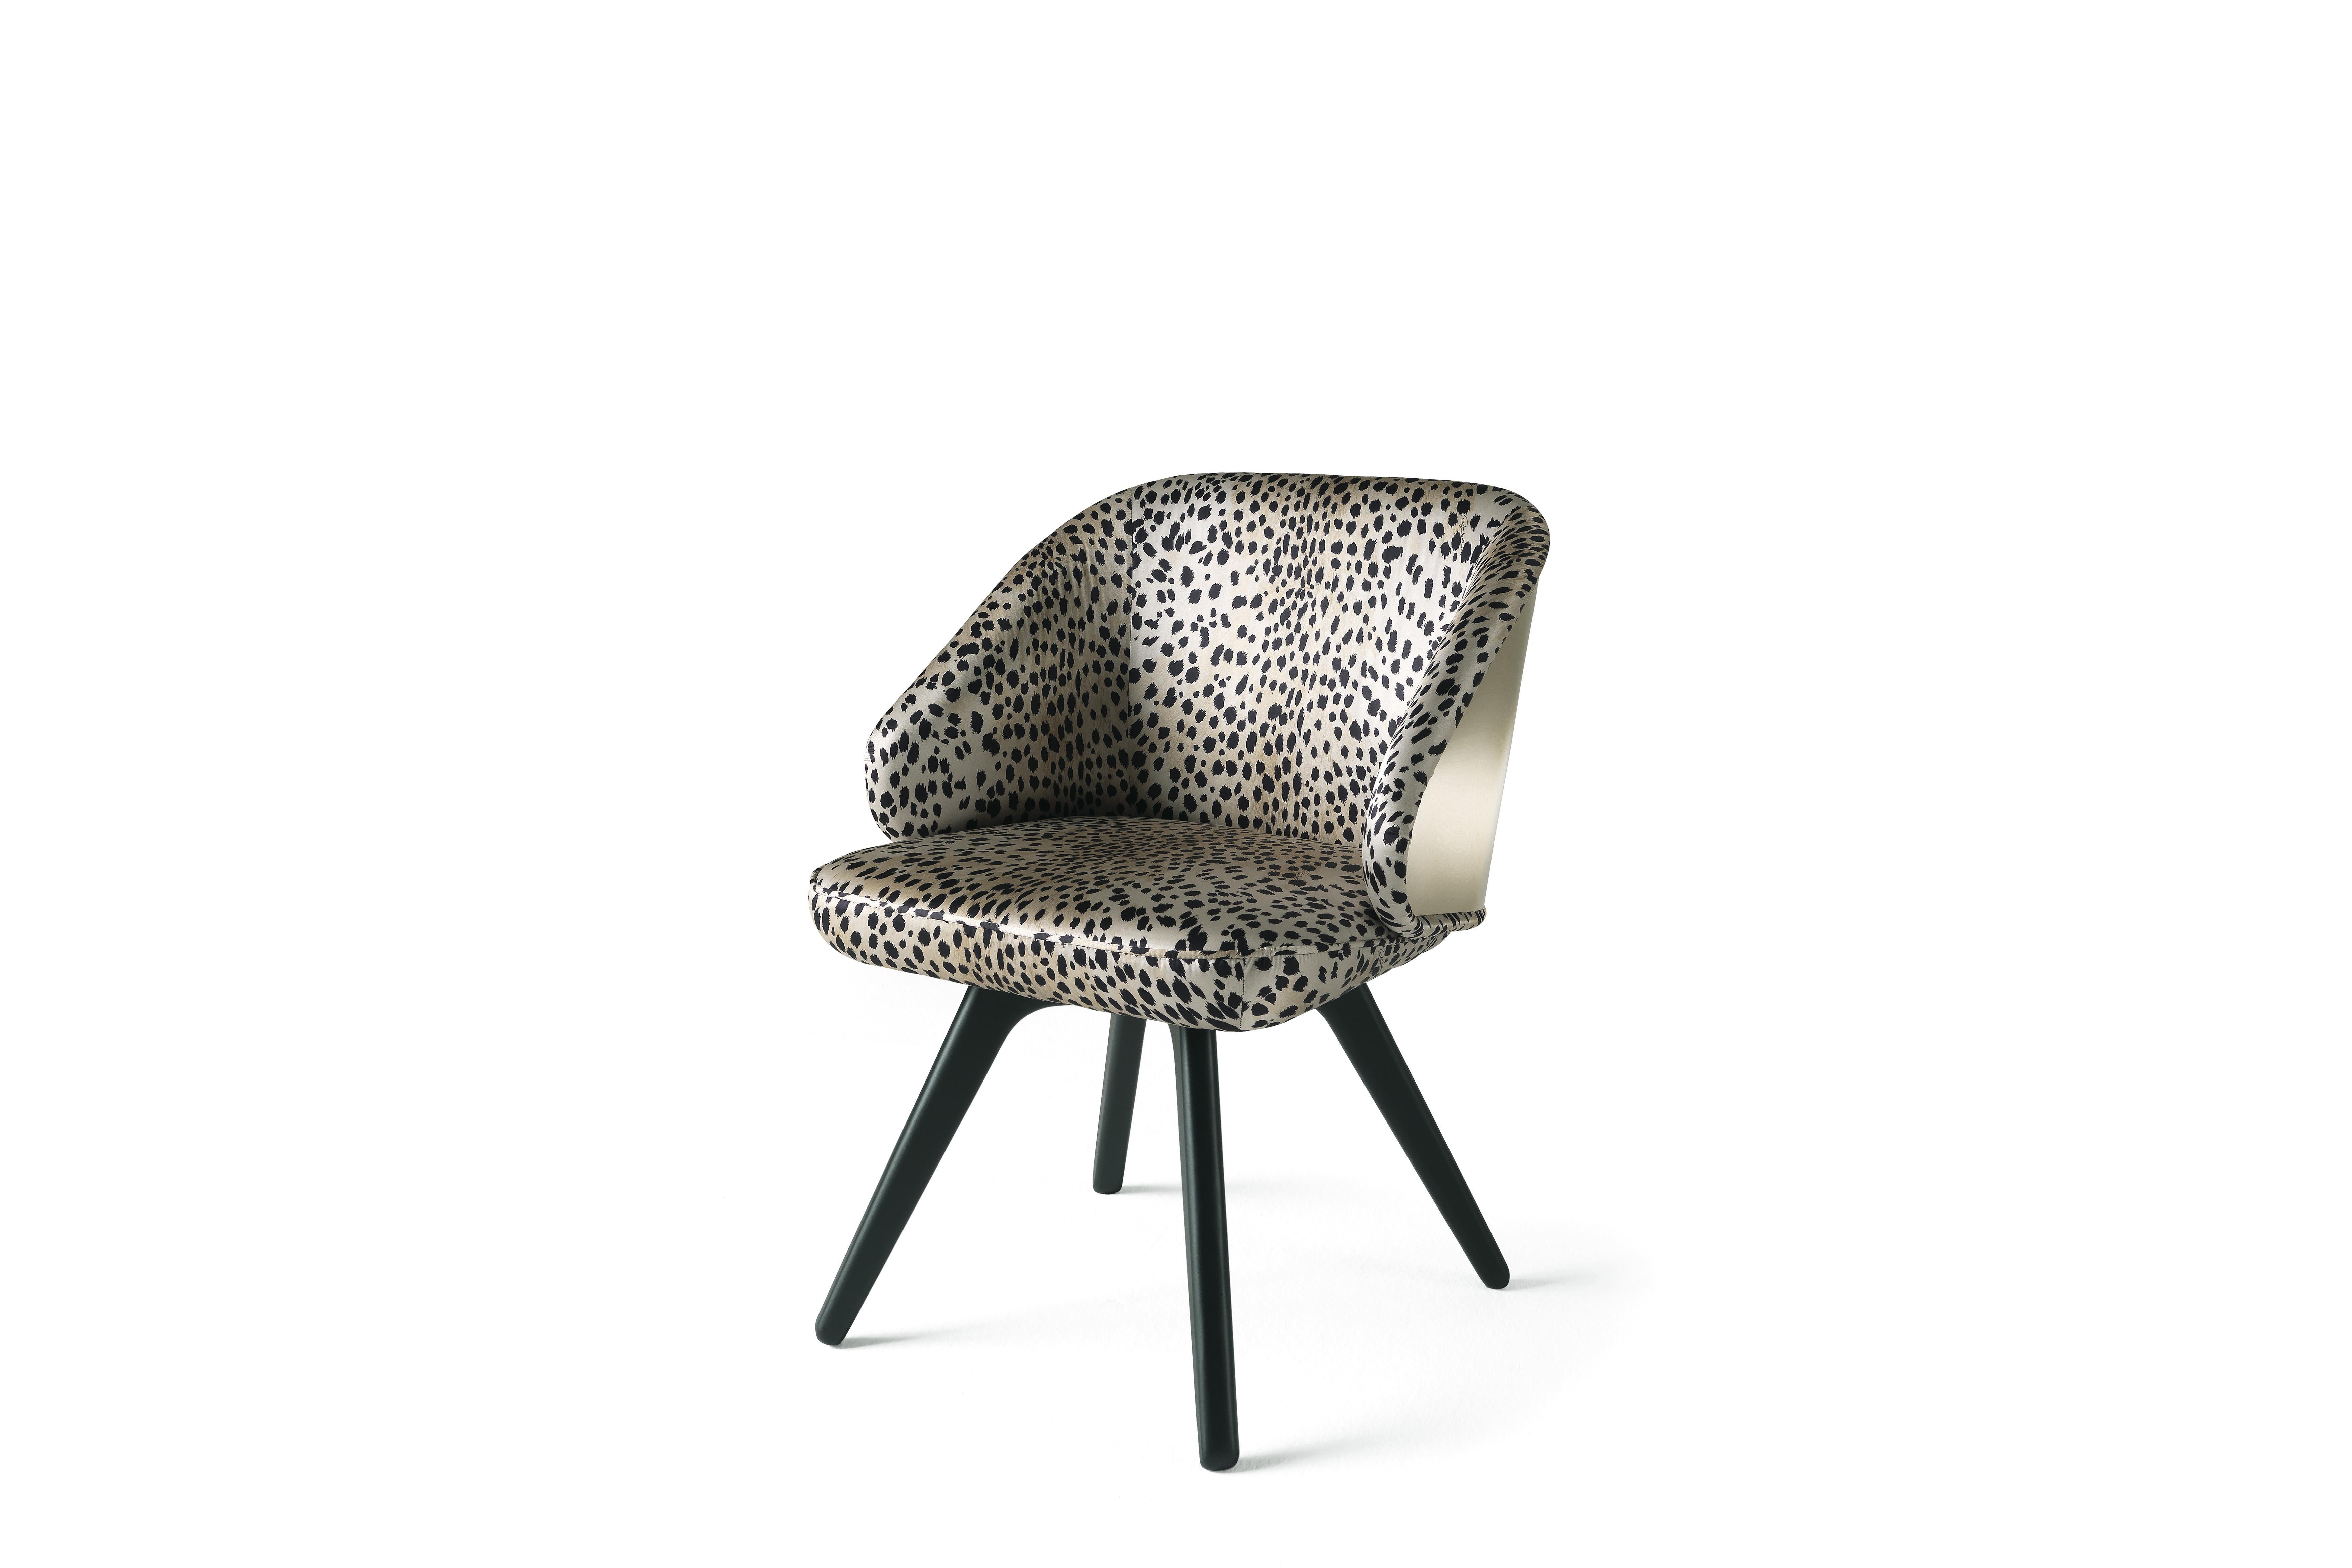 Appealing design and vintage lines for the Key West chair. Featuring sinuous and rounded shapes, it boasts an enveloping back with gold finishing and a comfortable seat upholstered with the new Wild Jaguar print. Sensuality, warmth and charm: the